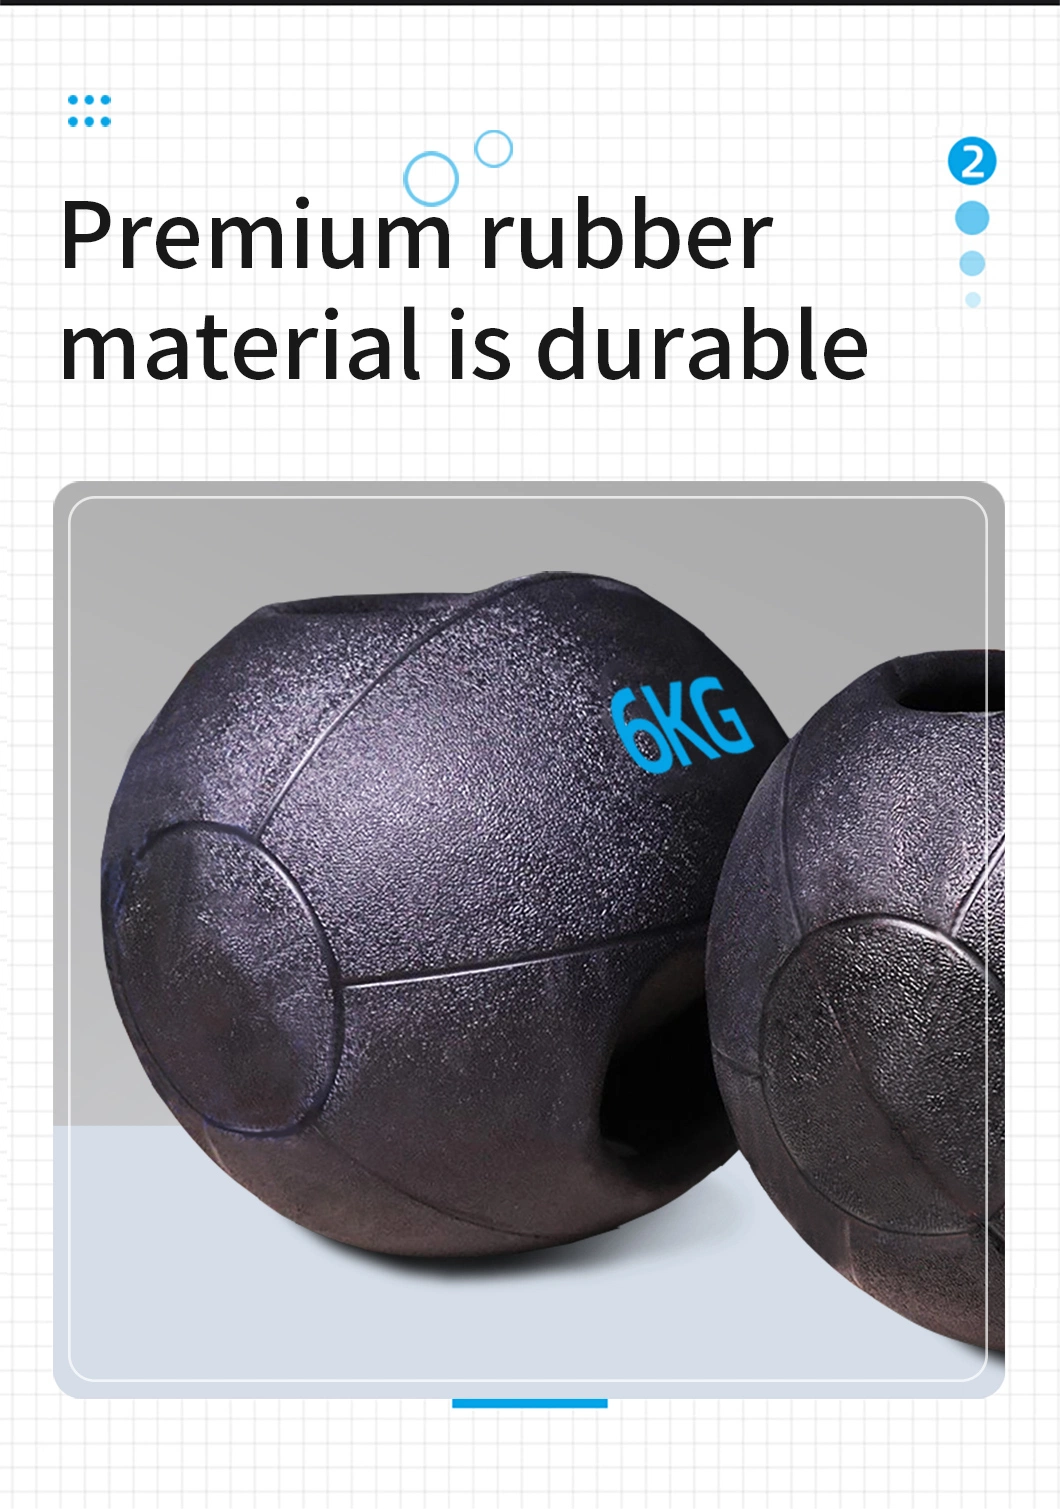 Rubber Medicine Ball with Dual Grip Exercise Weight Ball for Strength Training